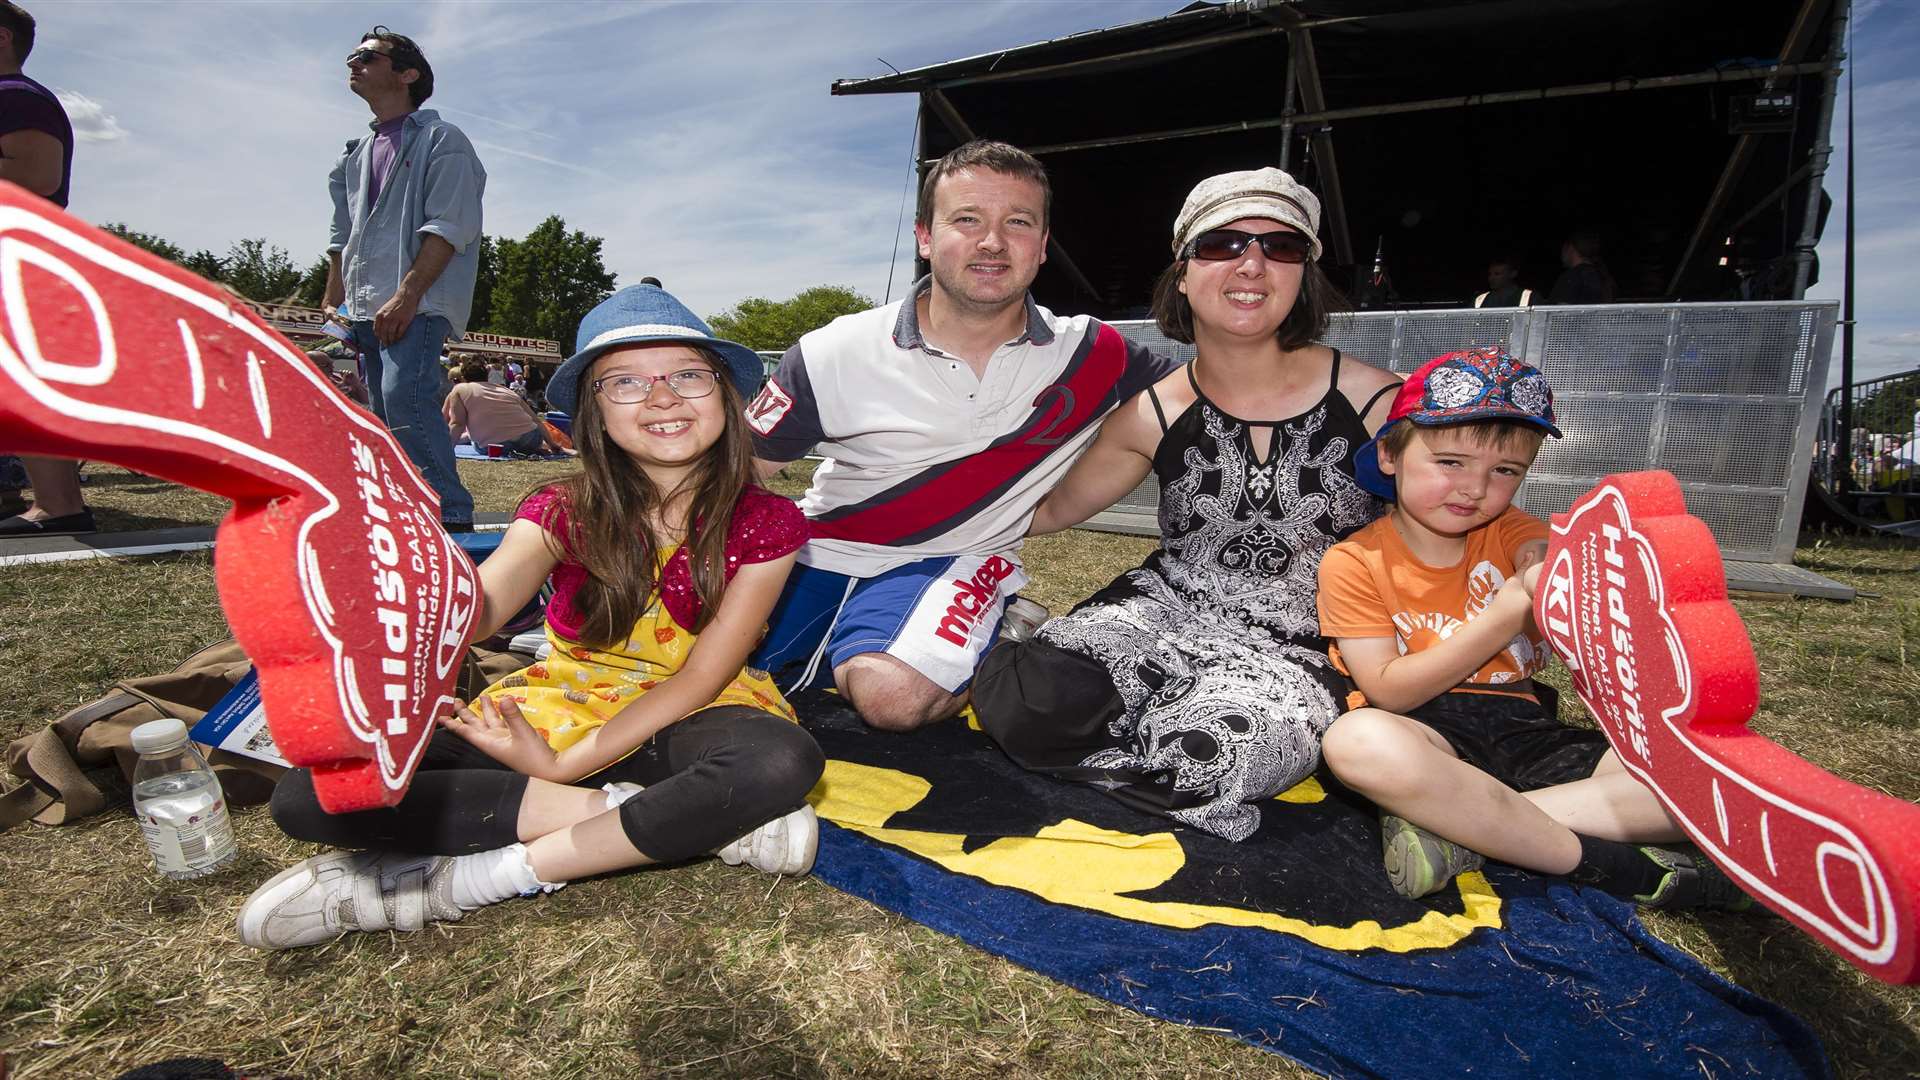 The Walby family at Dartford Festival. From left: Grace, 8, Geoff, Sabrina, and Wren, 6